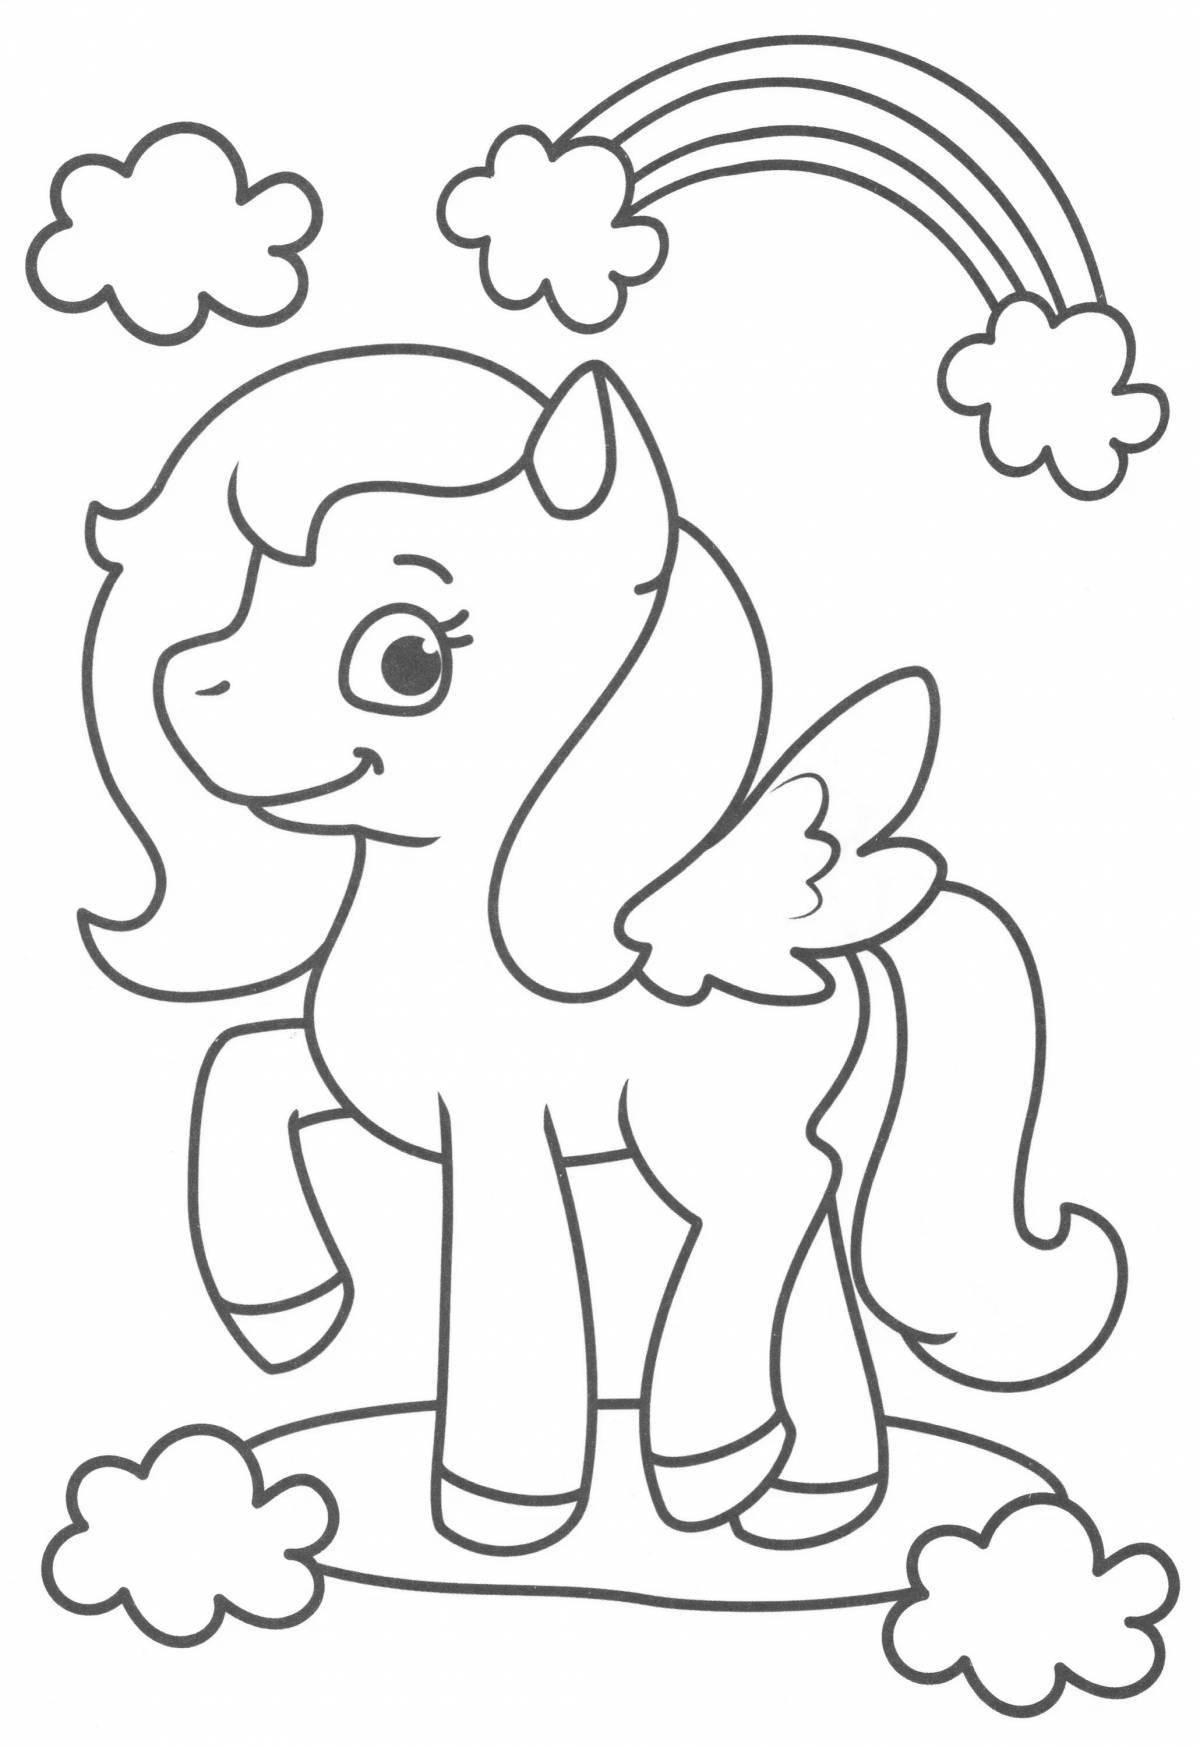 Violent pony coloring book for 4-5 year olds